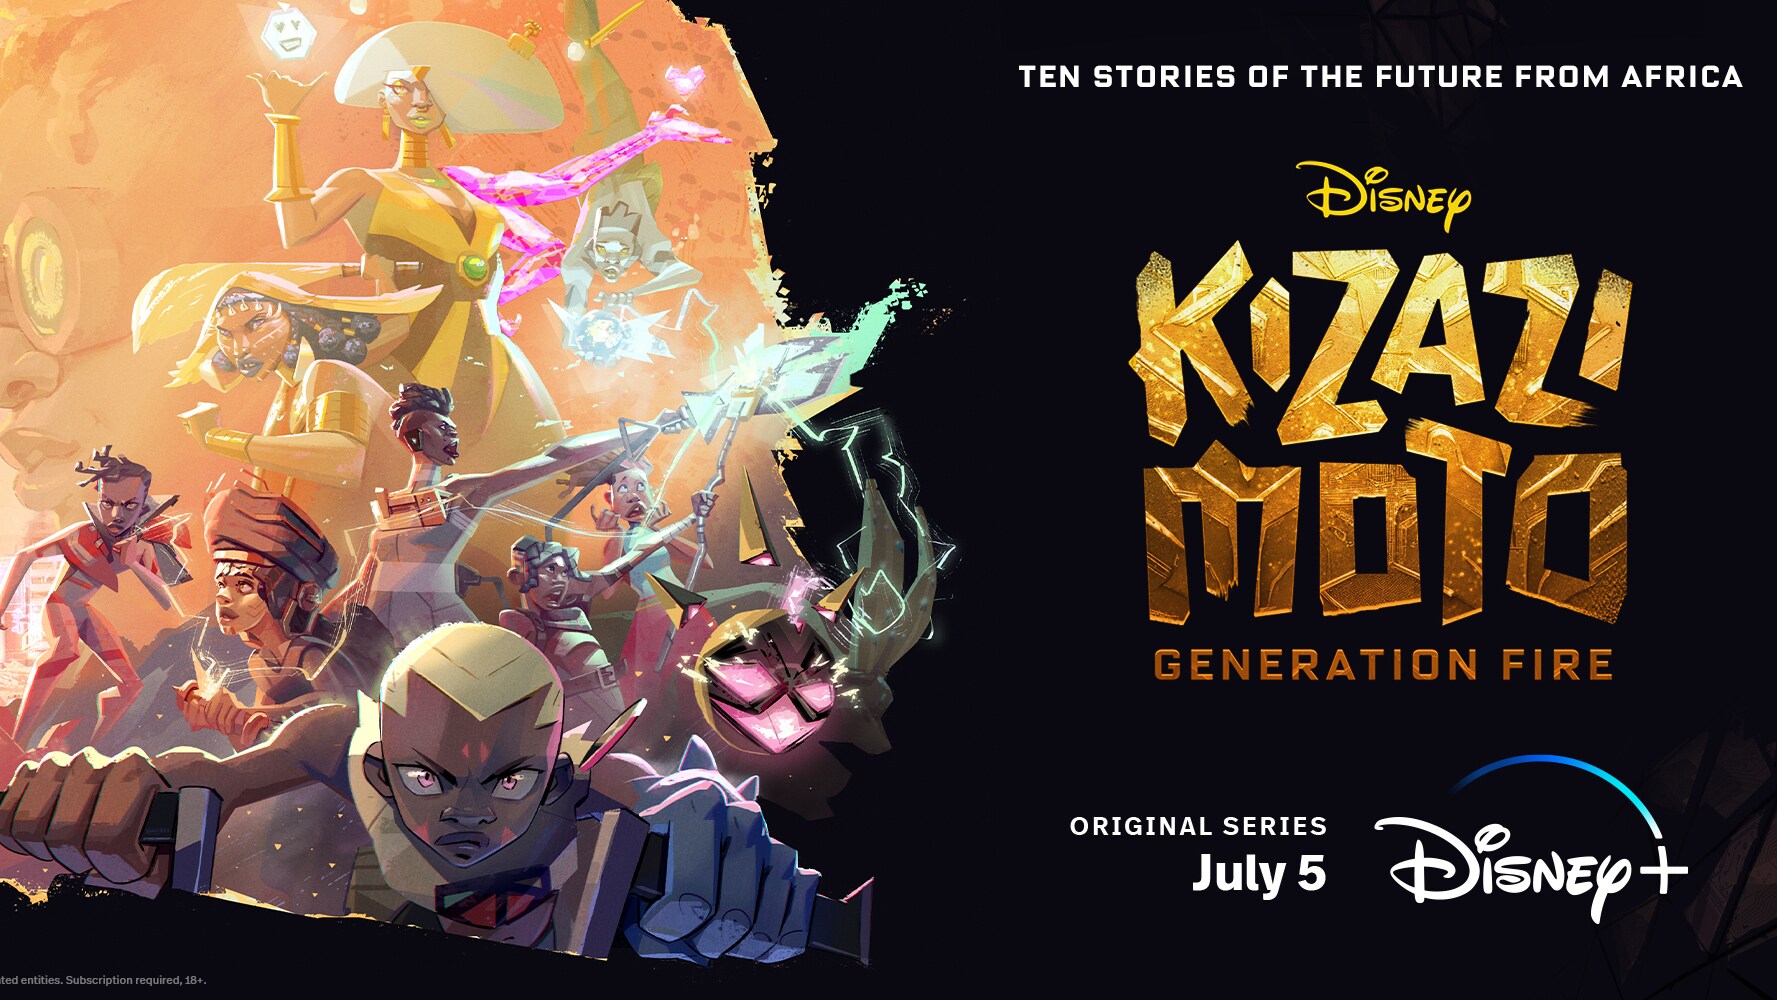 OFFICIAL TRAILER UNVEILED FOR ORIGINAL SERIES “KIZAZI MOTO: GENERATION FIRE” STREAMING 5 JULY EXCLUSIVELY ON DISNEY+ 